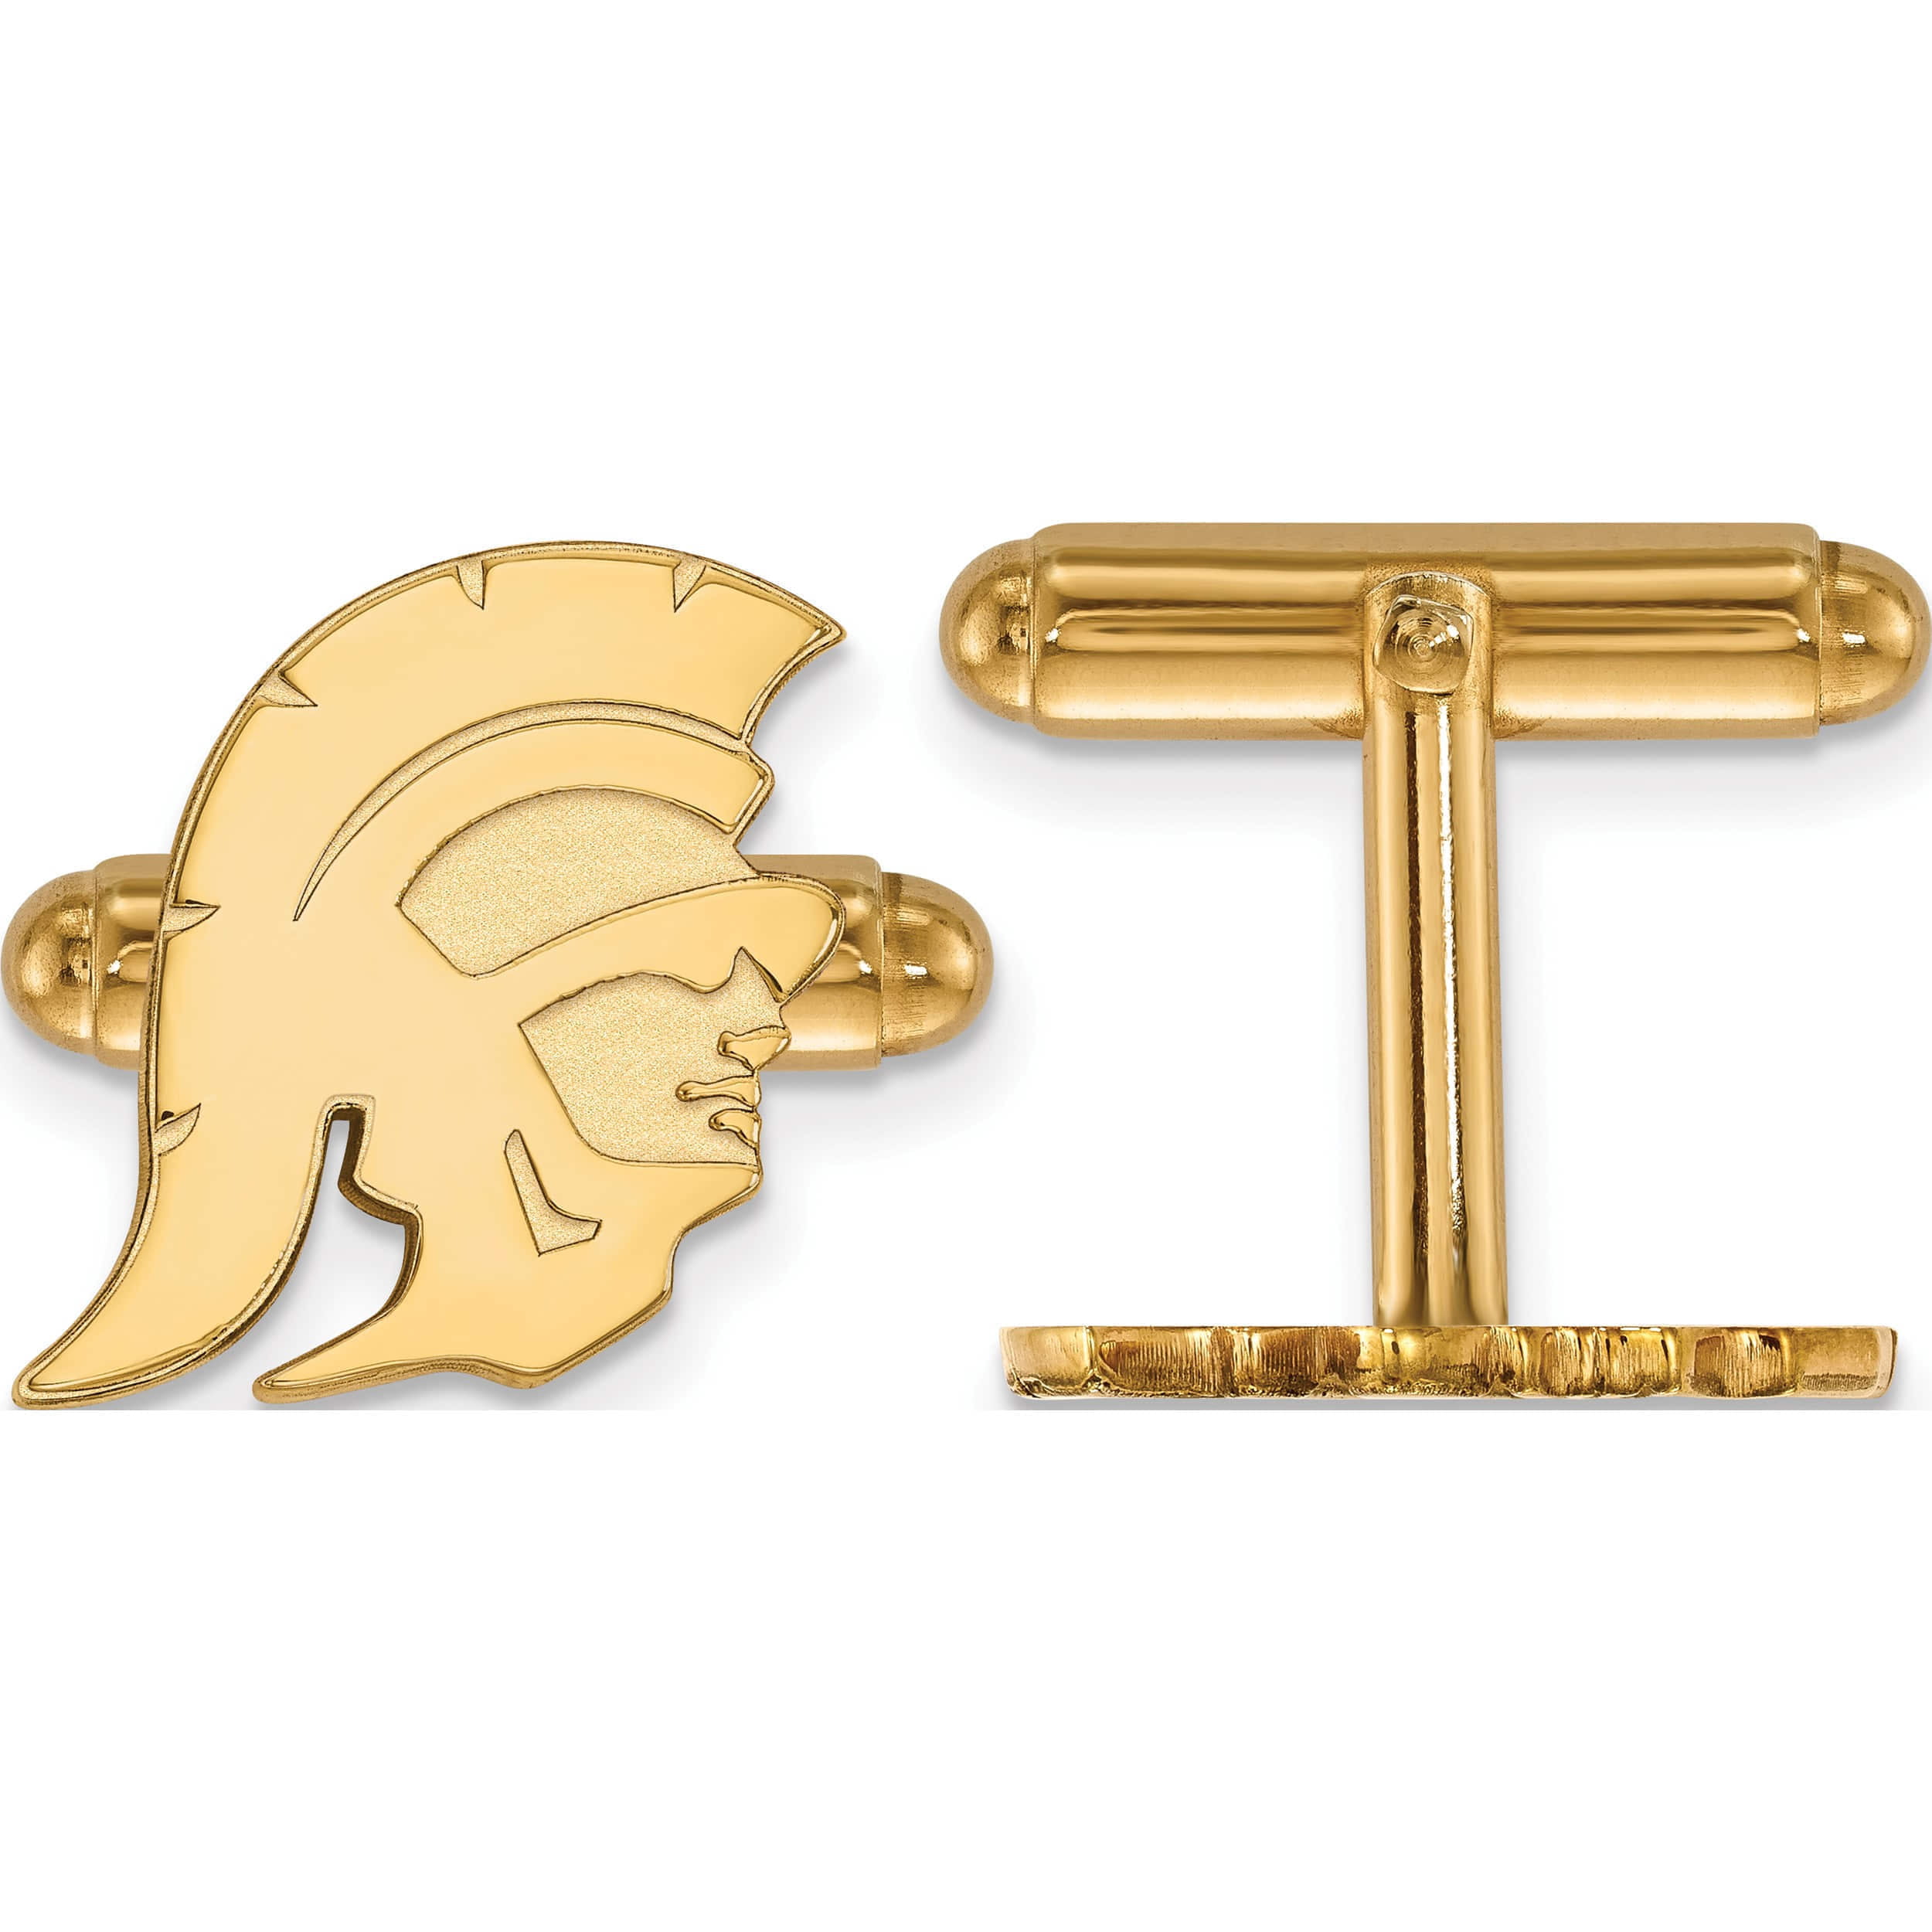 Cal Cuff Links Gold Plated 